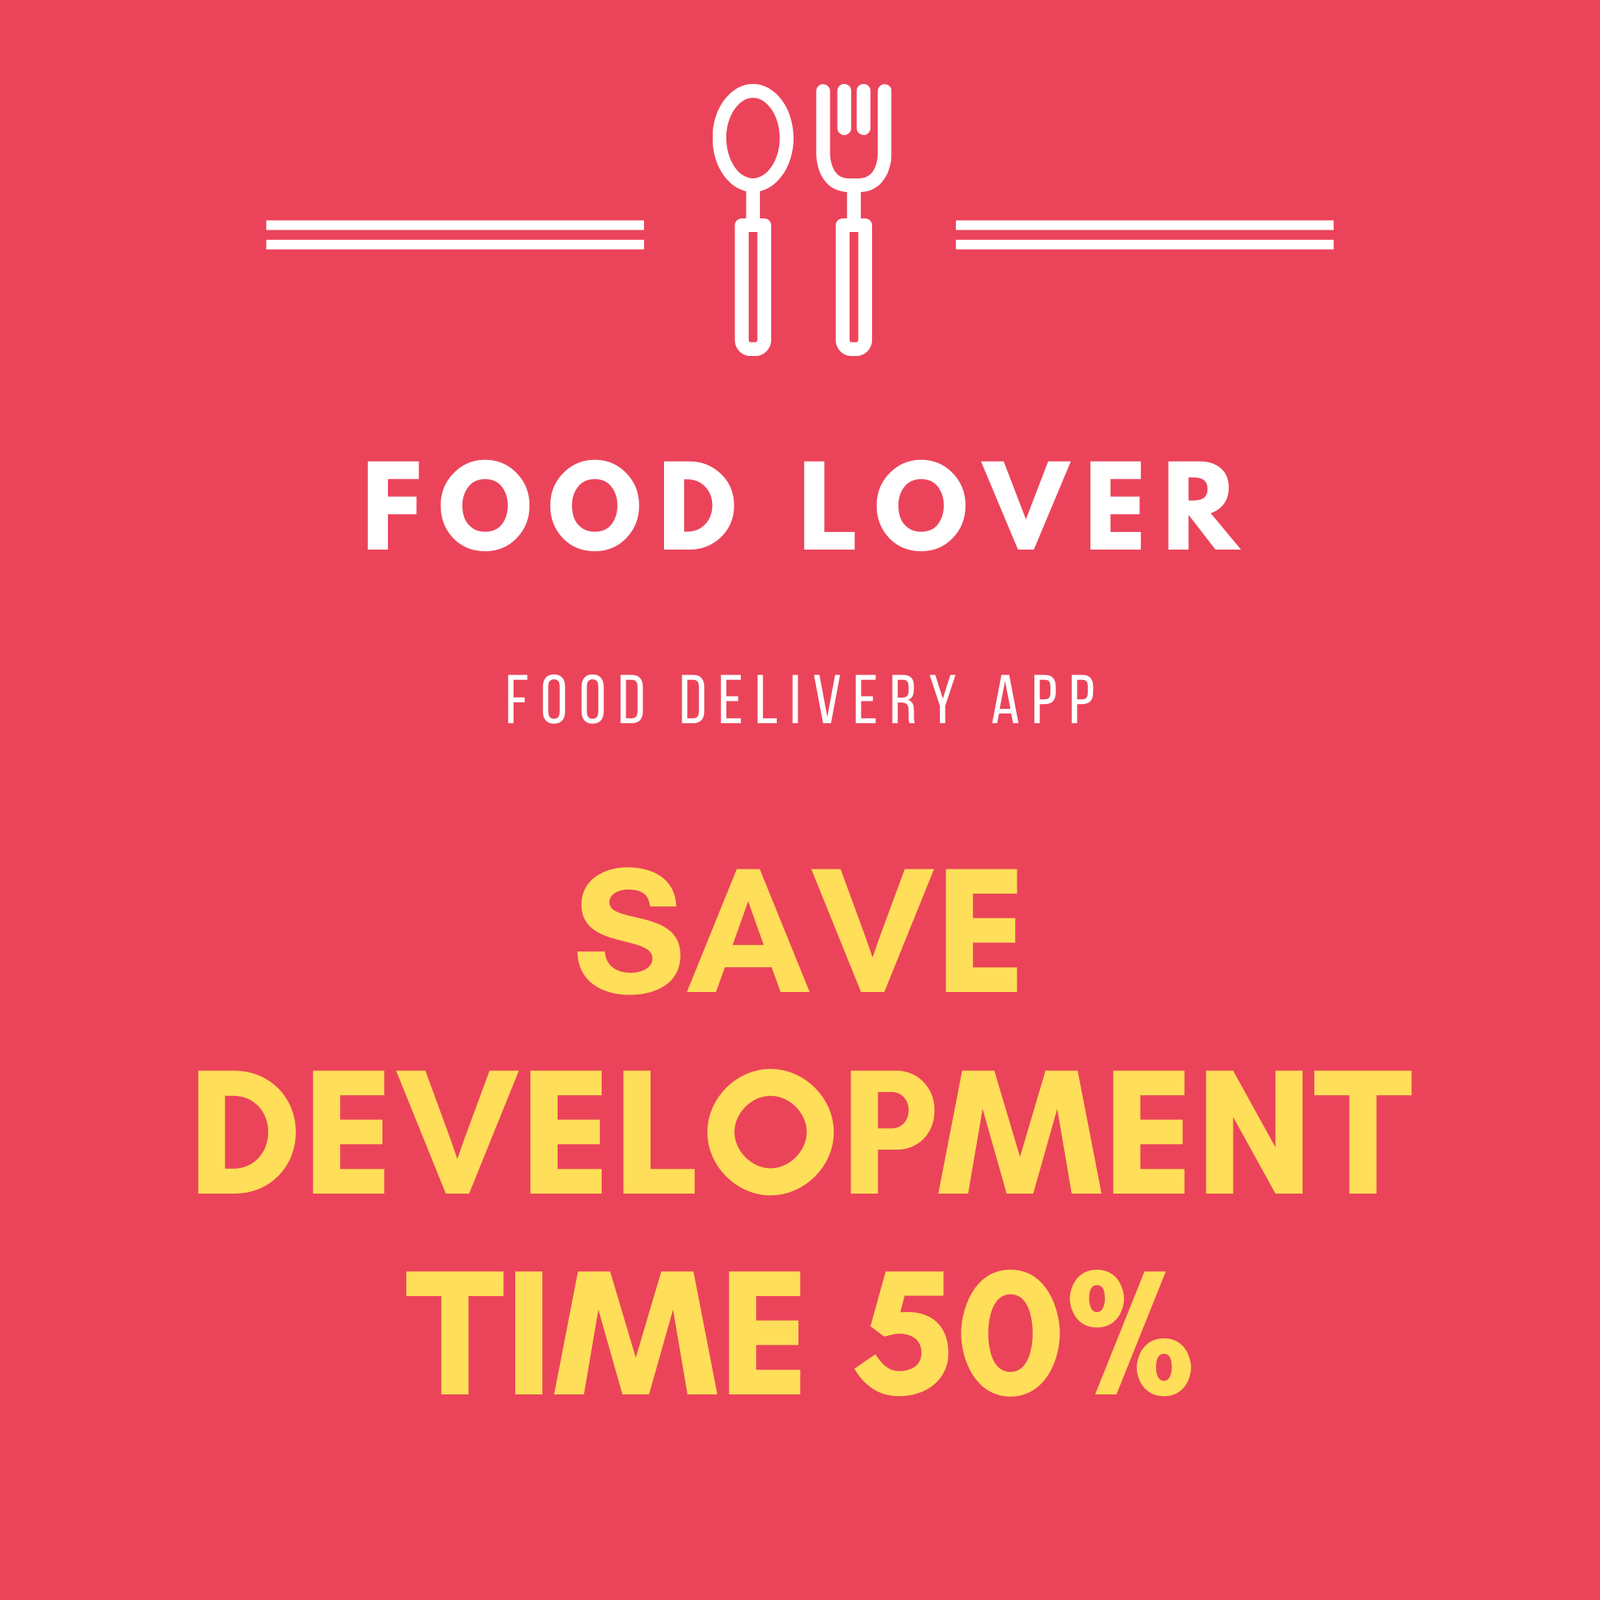 Restaurant and Food Delivery Ecommerce App (Ionic5 & Capacitor) Template UI - 2